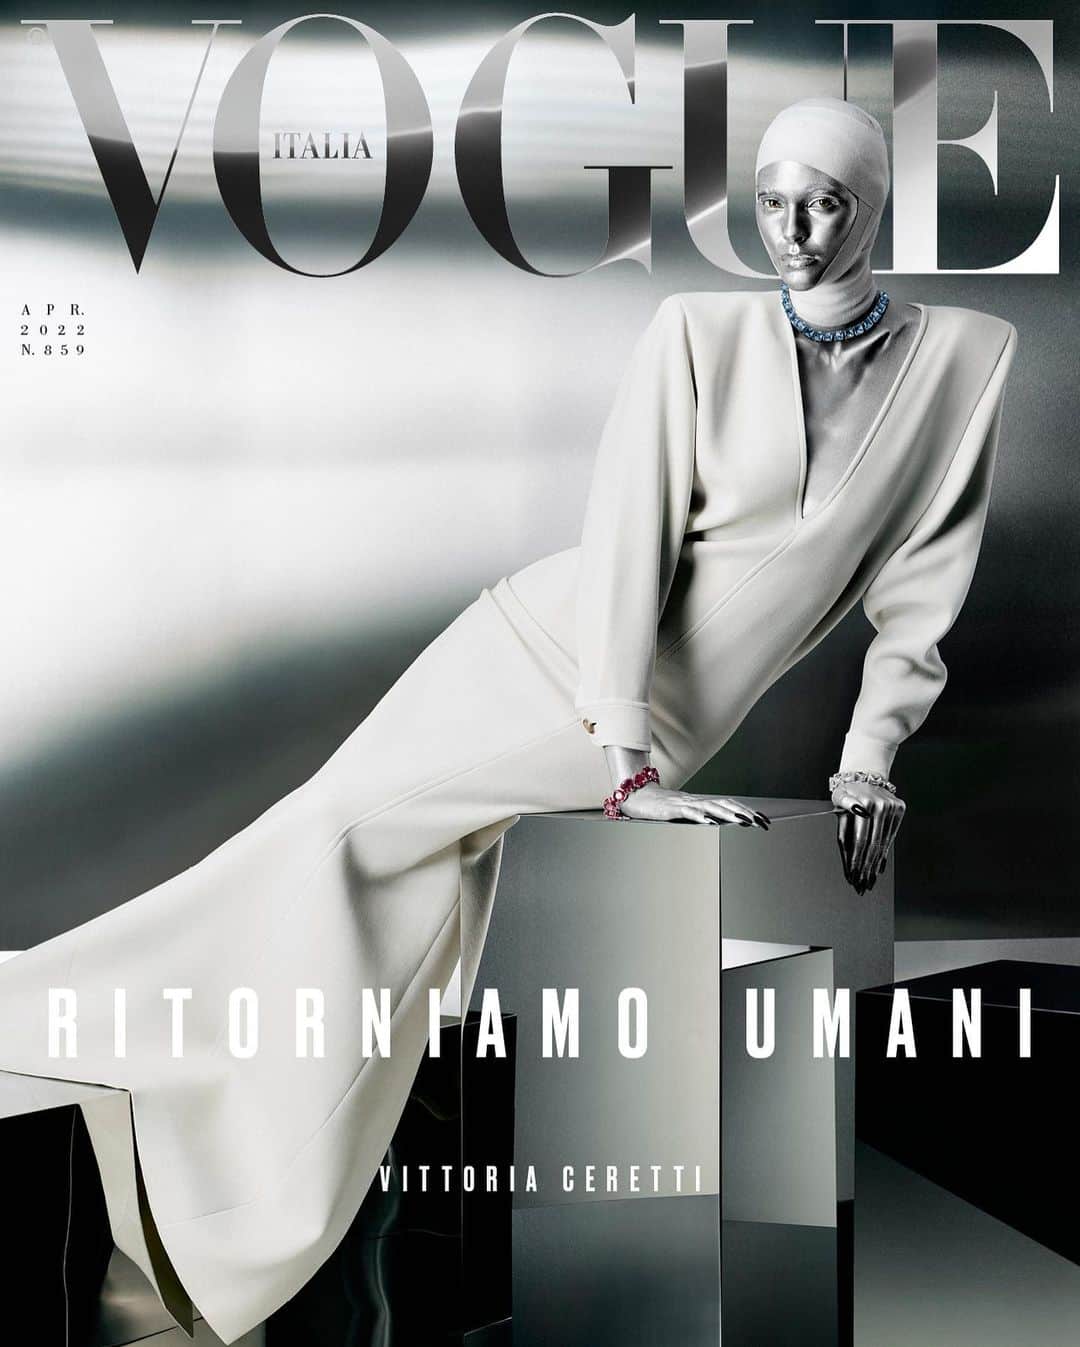 ヴィットリア・チェレッティさんのインスタグラム写真 - (ヴィットリア・チェレッティInstagram)「Top model @vittoria stars on the cover of #VogueItalia’s April issue, wearing #SaintLaurent by @anthonyvaccarello and @swarovski jewelry, photographed by @rafaelpavarotti and styled by @ibkamara in an unprecedented and visionary interpretation of her image. A perfect muse who entrusted herself fearlessly to the lens of @vogueitalia.   RITORNIAMO UMANI. “In this universe full of paradoxes and contradictions, we believe that the best human being is always the one who asks himself questions.’’ writes @franragazzi. And Rafael Pavarotti does precisely this by encouraging a reflection on humanity through these striking photographs which speak of an extraordinary kinship, connected and disconnected at the same time: HUMANITY, TECHNOLOGY, NATURE. In a powerful letter accompanying the images, @rafaelpavarotti_ writes: ‘’Climate, environmental and technological changes make us go even deeper, plunging into the urgency of rethinking our actions and reactions. The consequences that have already come and those that are yet to come. What is man's connection with nature? How grand is our interdependence? How much of the evolving technology will make us evolve also as individuals, as a society? What is the interconnectivity of the whole? How can we become more aware?’’   Read the full letter at the link in bio. Find out more on our April Issue, on newsstands from tomorrow.  Full credits:    Photographer: Rafael Pavarotti @rafaelpavarotti_  Styling: Ib Kamara @ibkamara  Talent: Vittoria Ceretti @vittoria @elitemodelworld  Hairstylist: Benjamin Muller @benjaminmullerhair @maworldgroup  Make Up Artist: Chiao Li Hsu @chiaolihsu @clmagency  Nail Artist: Anaïs Cordevant @anaiscordevantnailartist @saint_germain_agency  Production Design by Mary Howard @mhs_artists Floral Styling by Thyrse @pinkstudio  Styling assistants: Felix Paradza, Mark Mutyambizi, Cari Lima @felixparadza @makanak_a  Modiste: Carole Savaton @carolesavaton  Production: Brachfeld @brachfeld_    Head of Content: @franragazzi  Vogue Global Creative Director: @juanCP」4月4日 22時00分 - vittoria